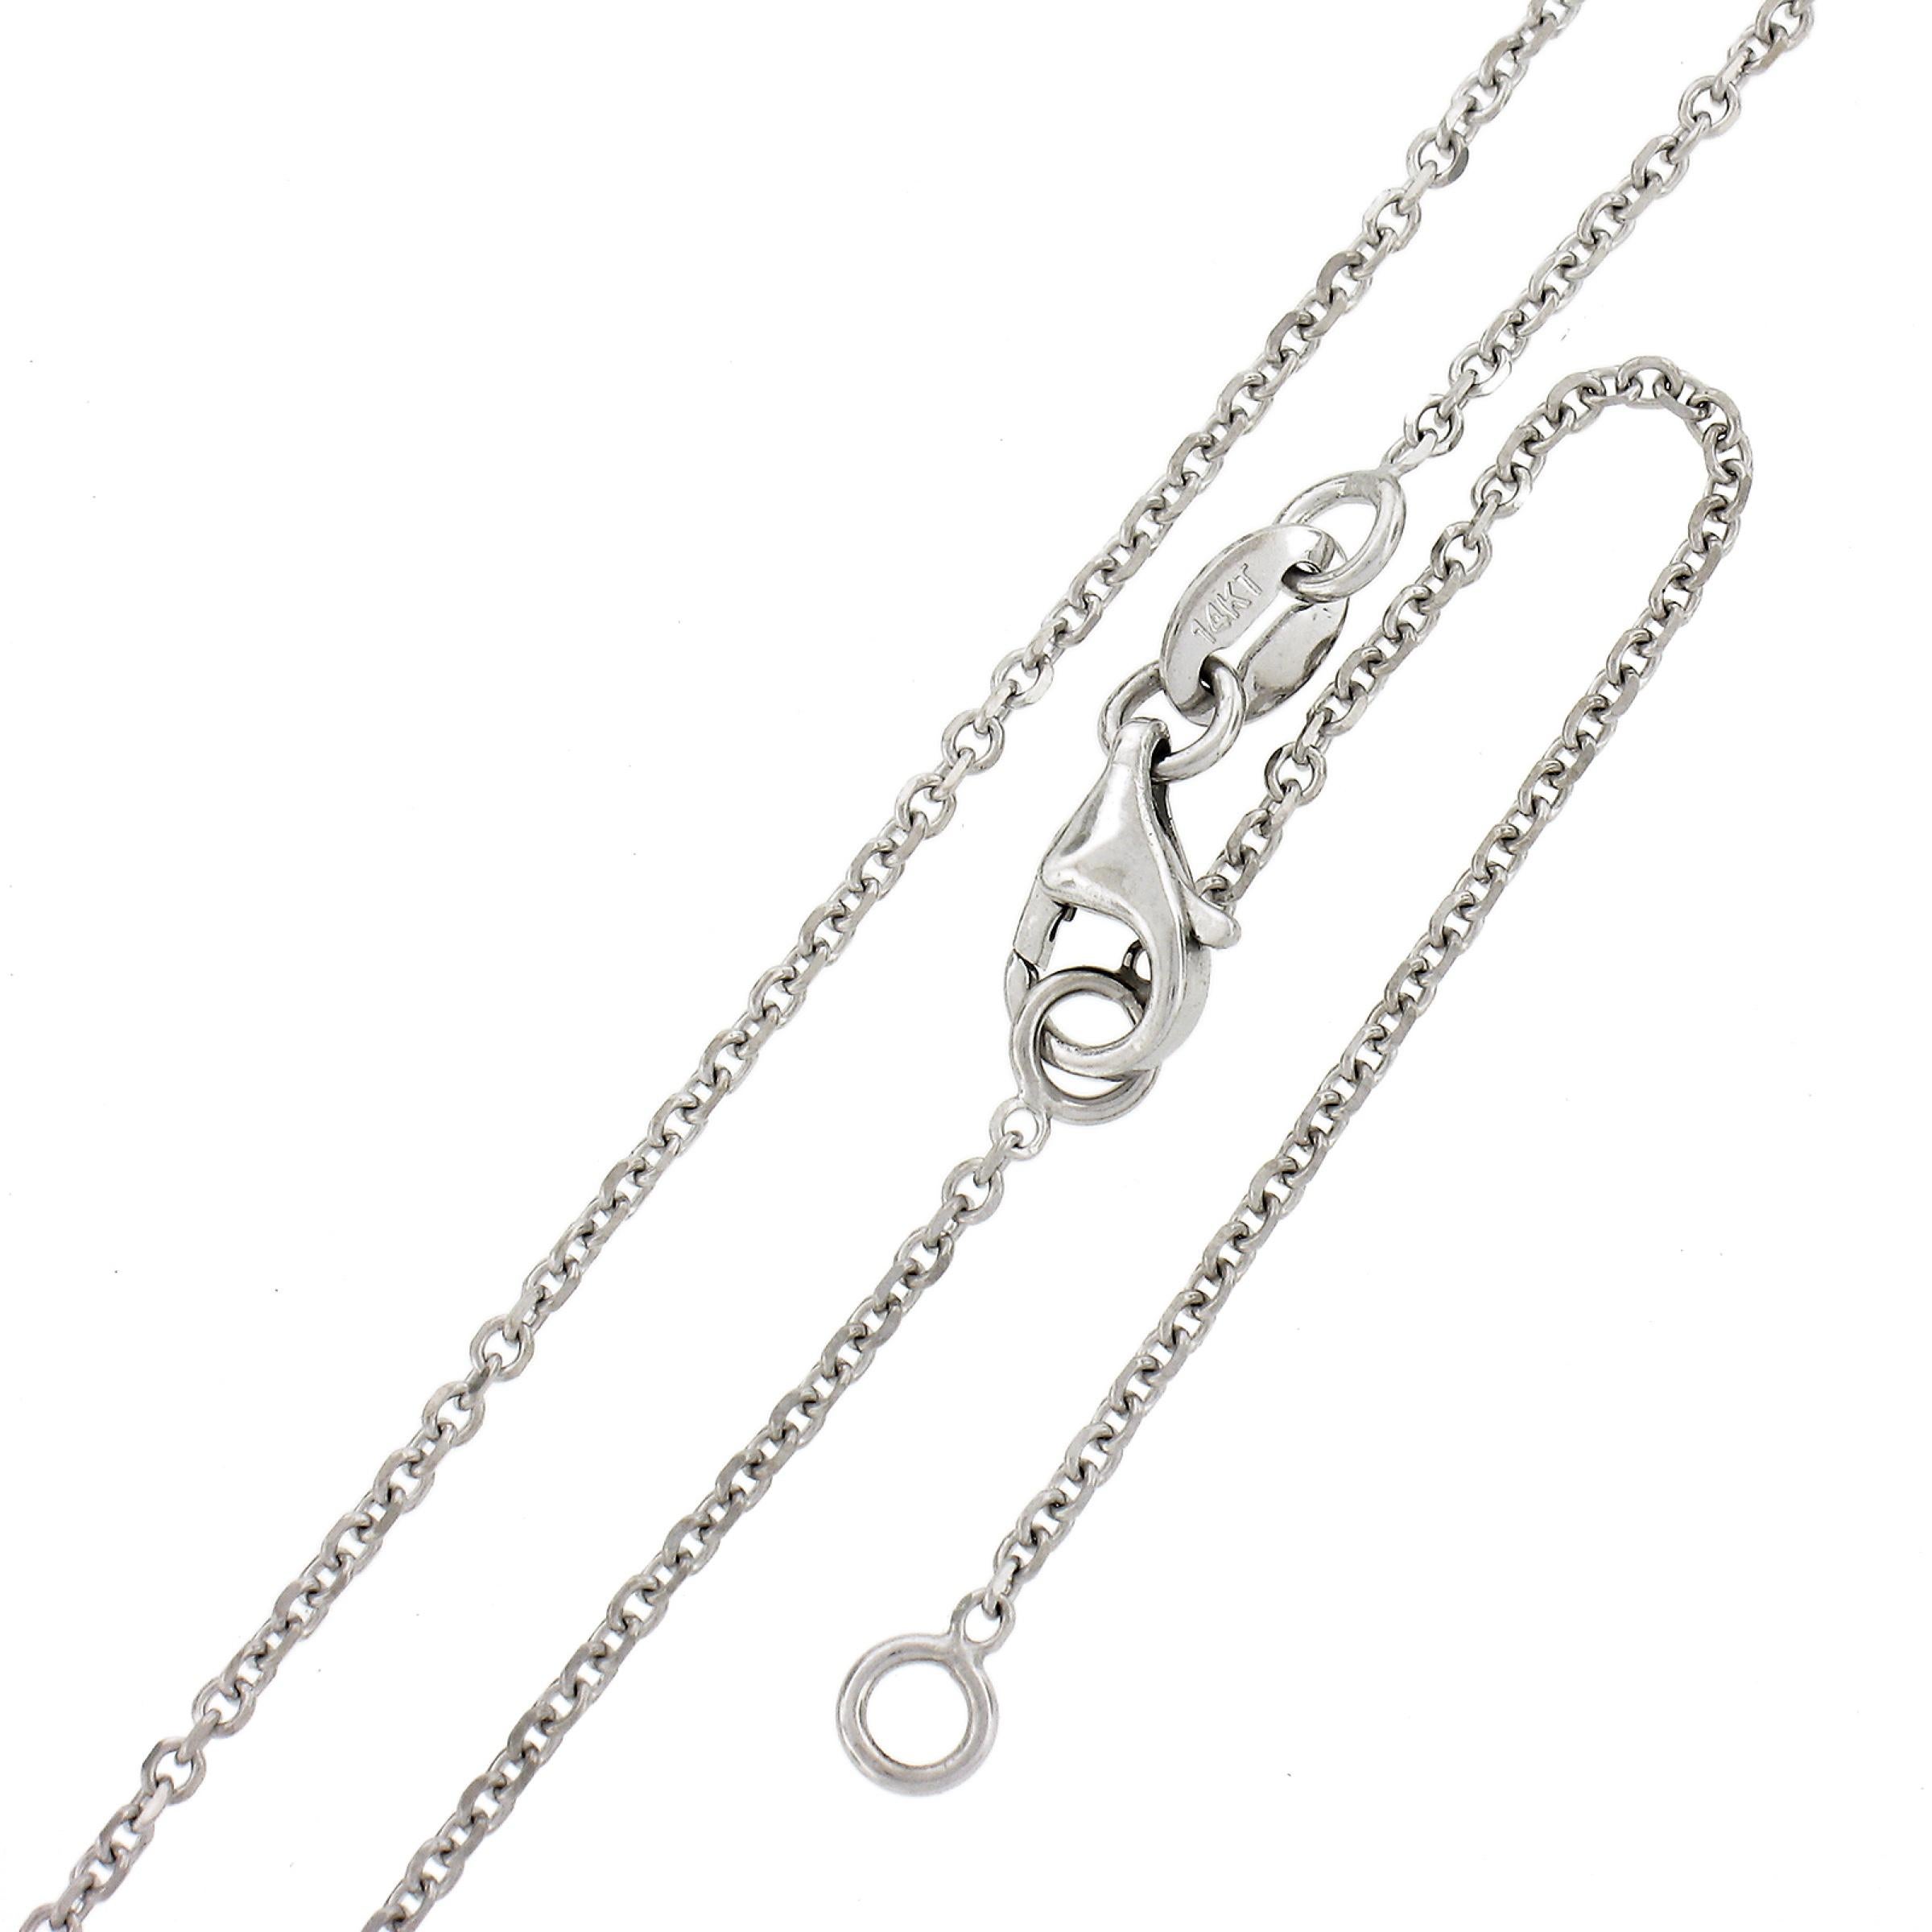 NEW 14k White Gold .84ctw GIA Round Diamond Solitaire Pendant & Adjustable Chain For Sale 3